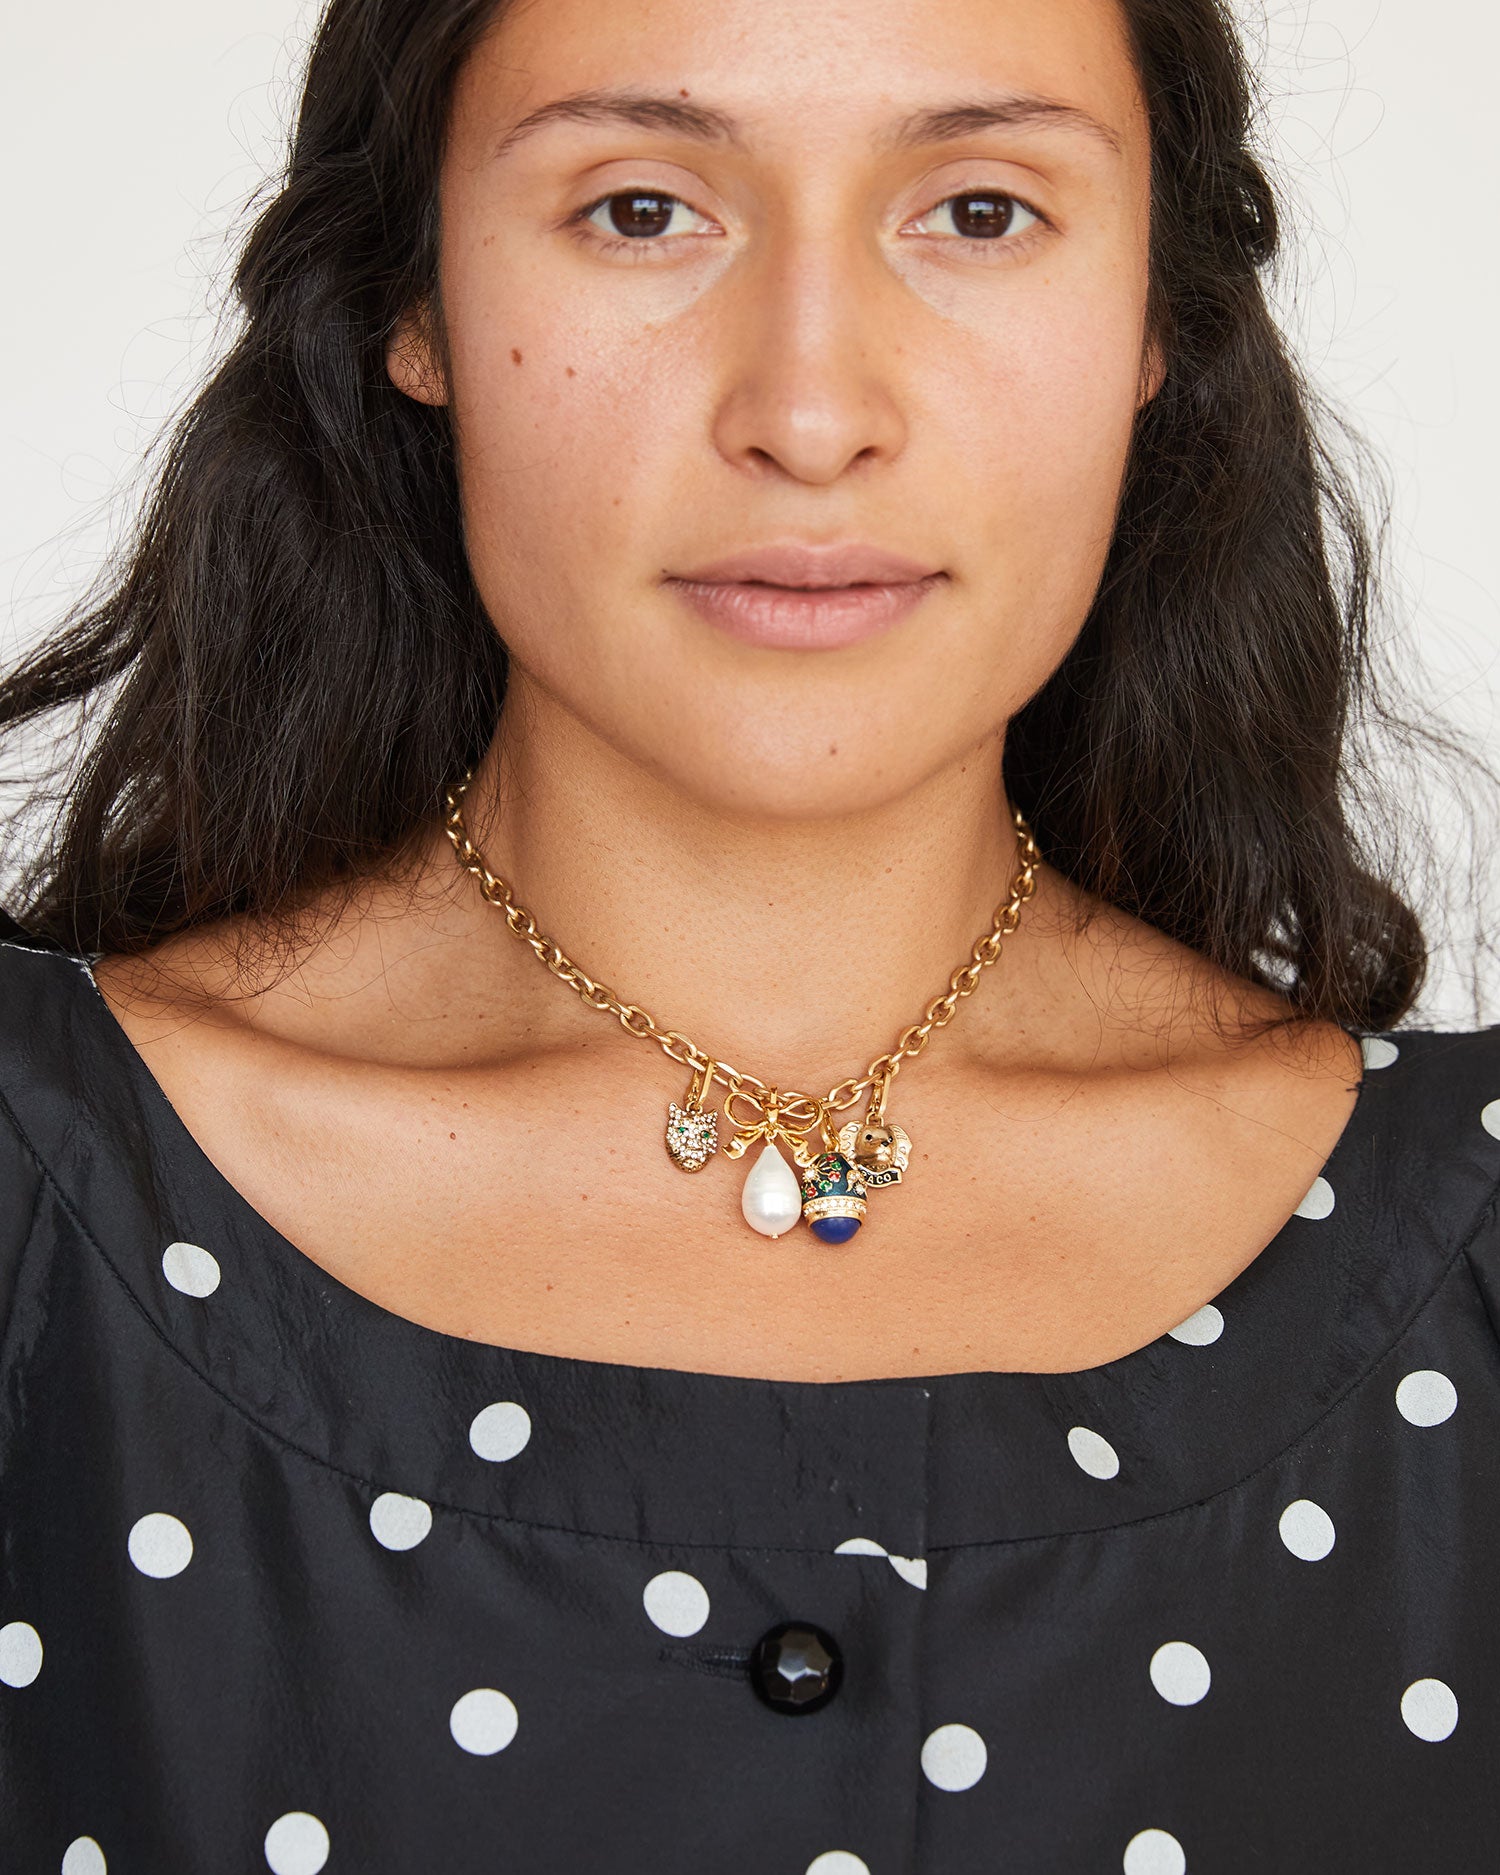 Andrea wearing the Bow & Pearl Charm on the CV chain charm necklace with other charms